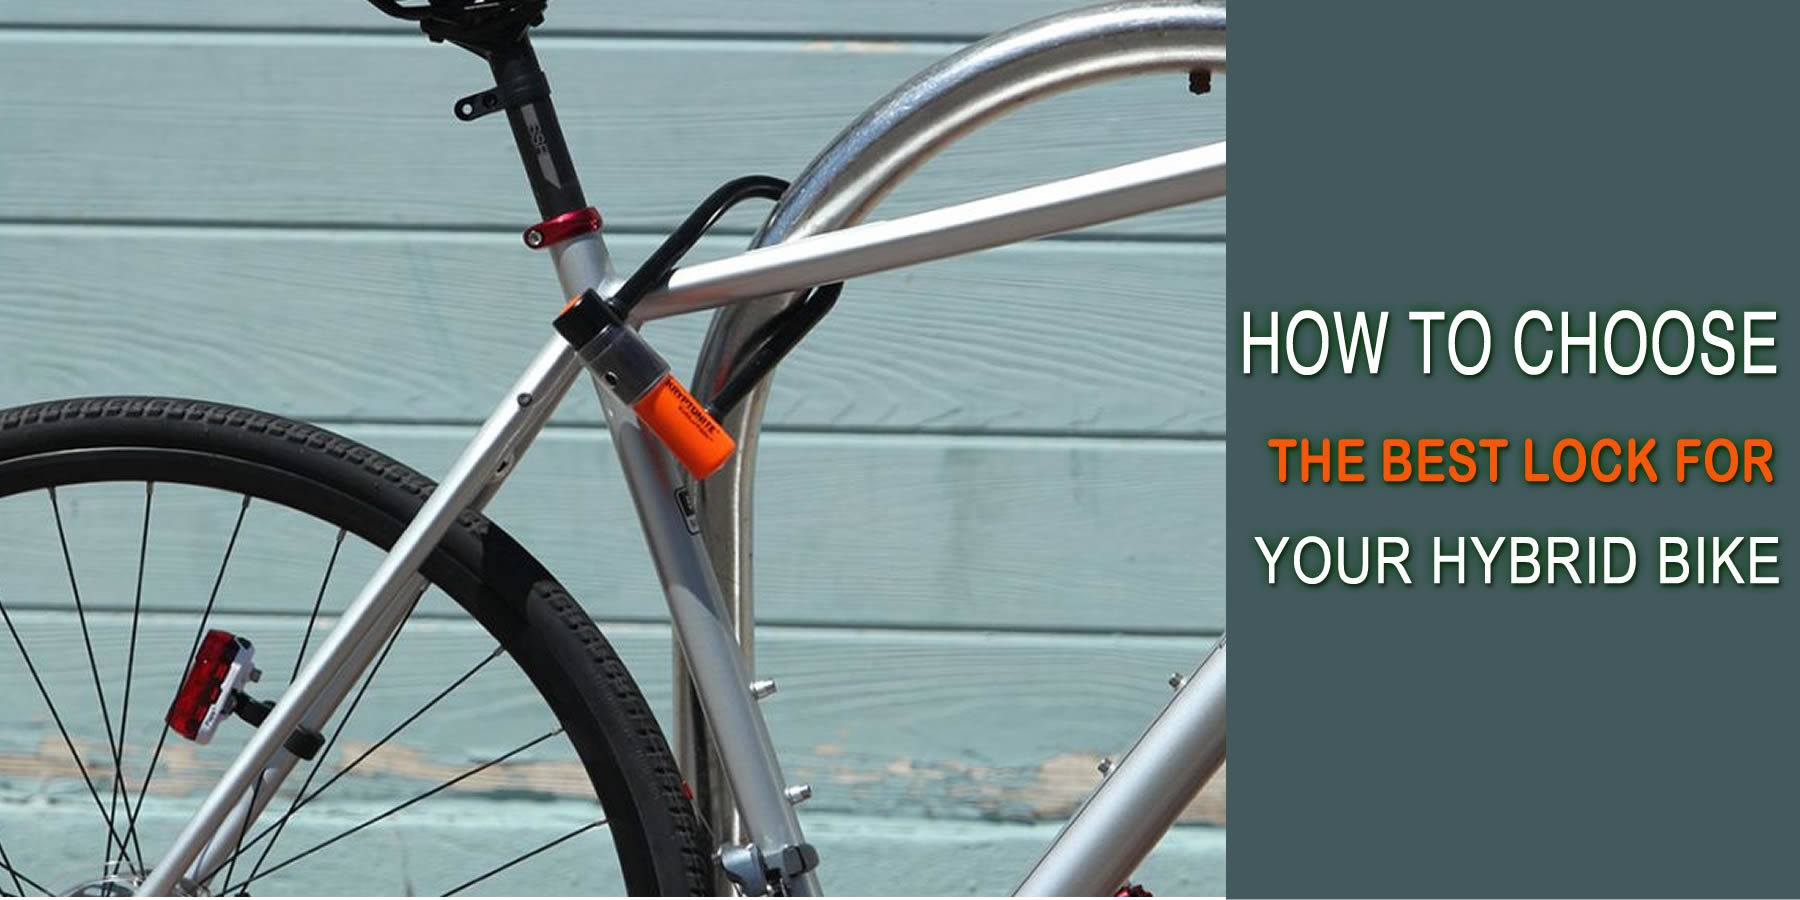 How To Choose The Best Lock For Your Hybrid Bike